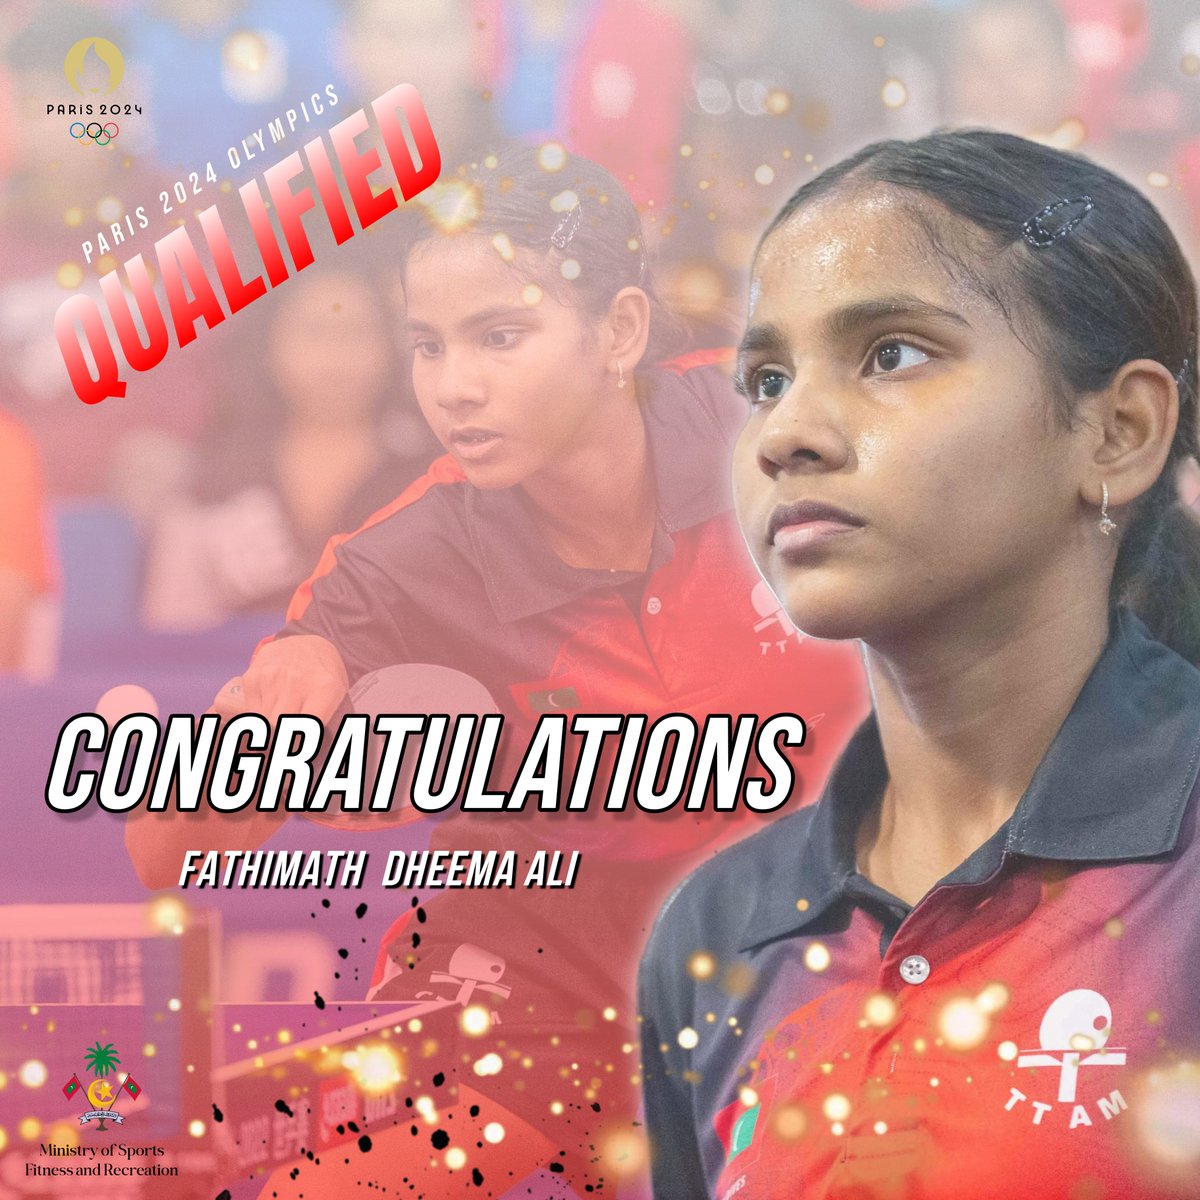 CONGRATULATIONS to Fathimath Dheema Ali for her qualification to Paris Olympics 2024. She made HISTORY by becoming the first-ever Maldivian athlete to be QUALIFIED for an Olympics.